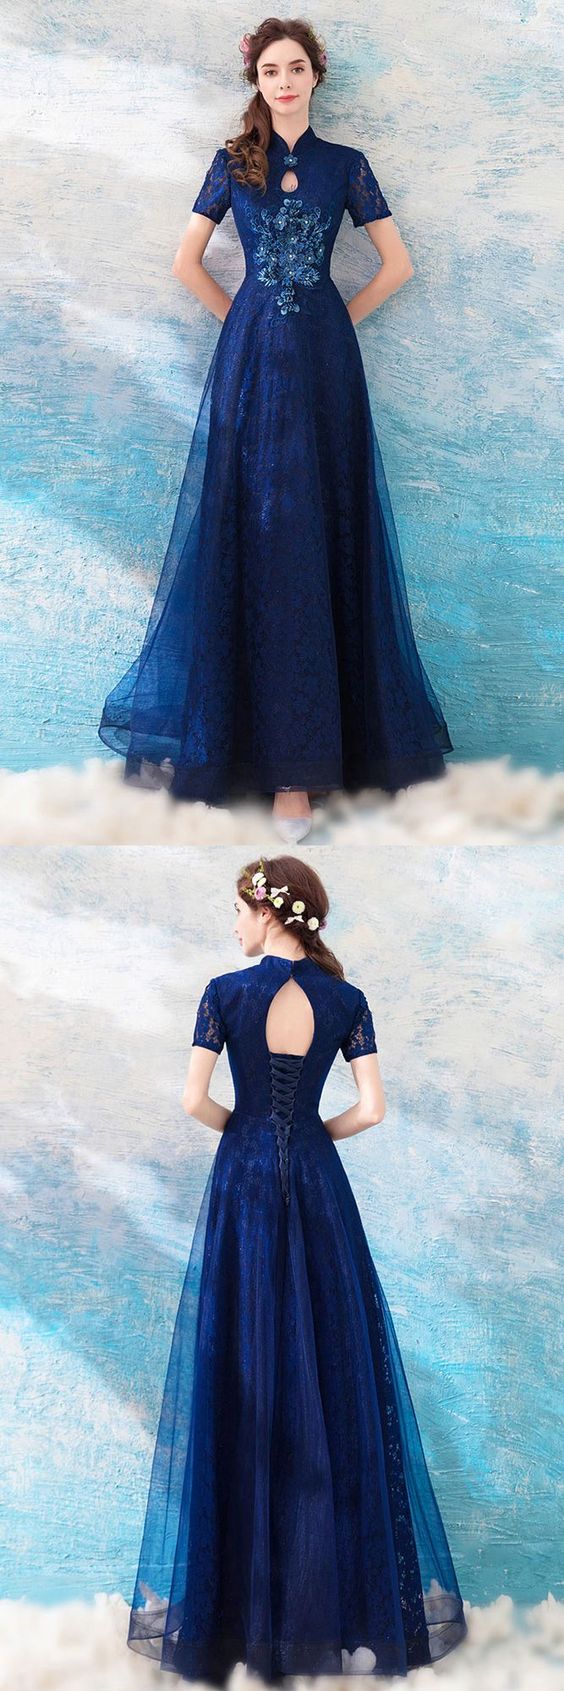 Elegant Navy Blue A Line Tulle Formal prom Party Dress With Short Sleeves cg1814